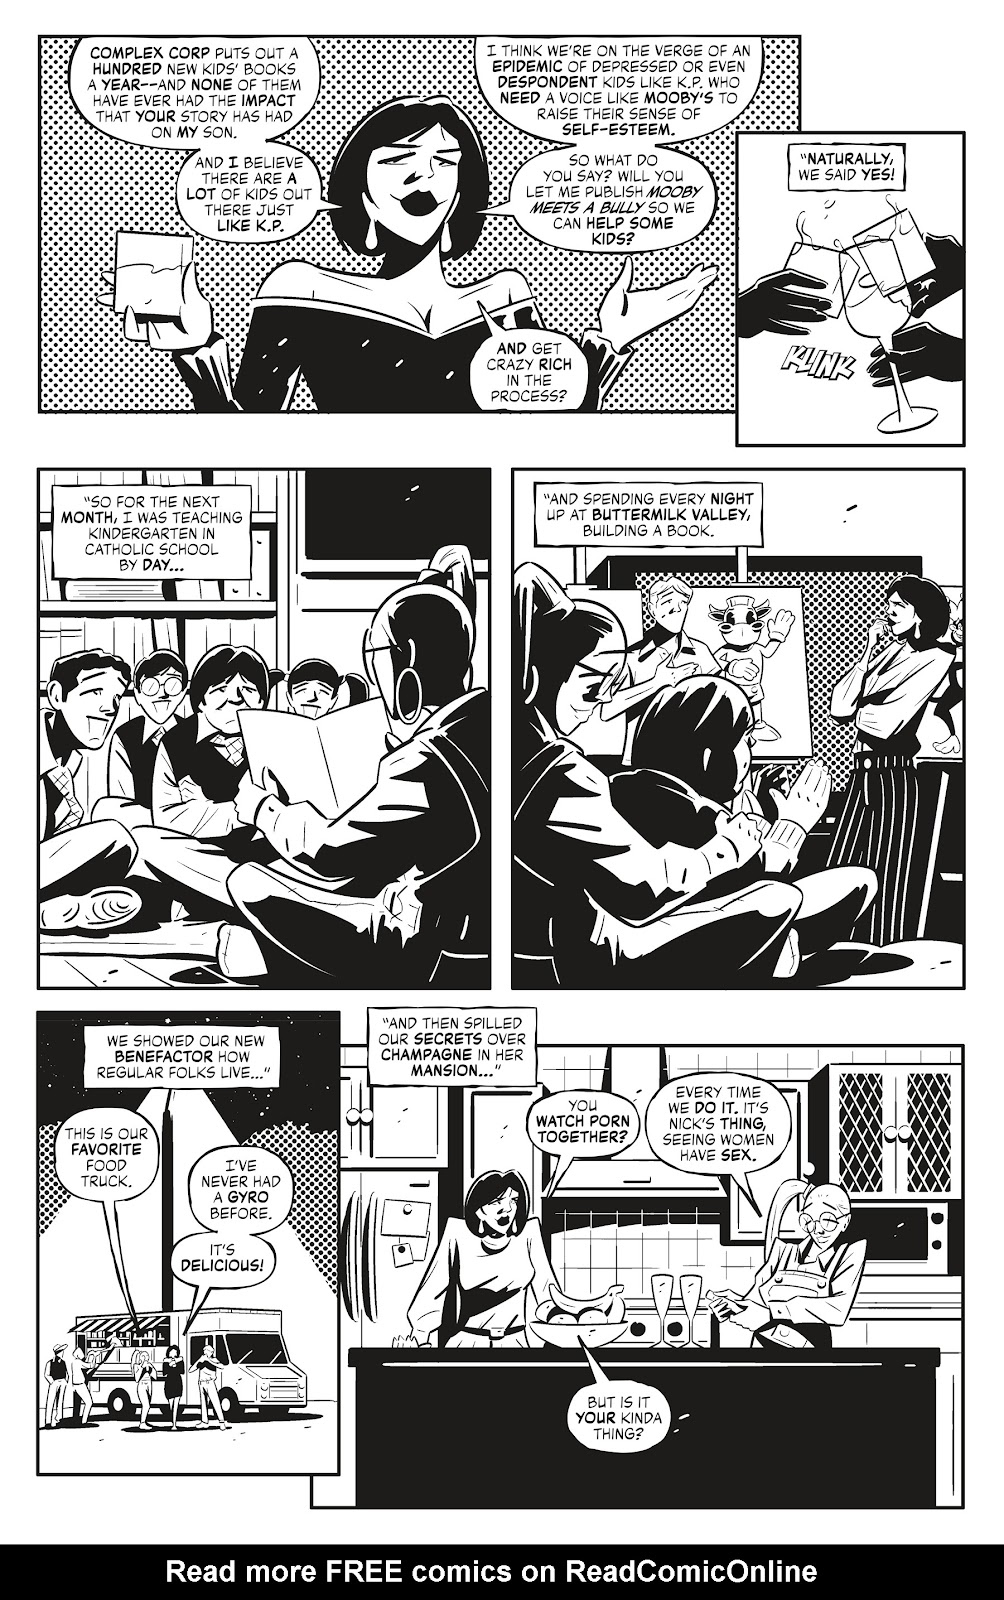 Quick Stops Vol. 2 issue 1 - Page 18